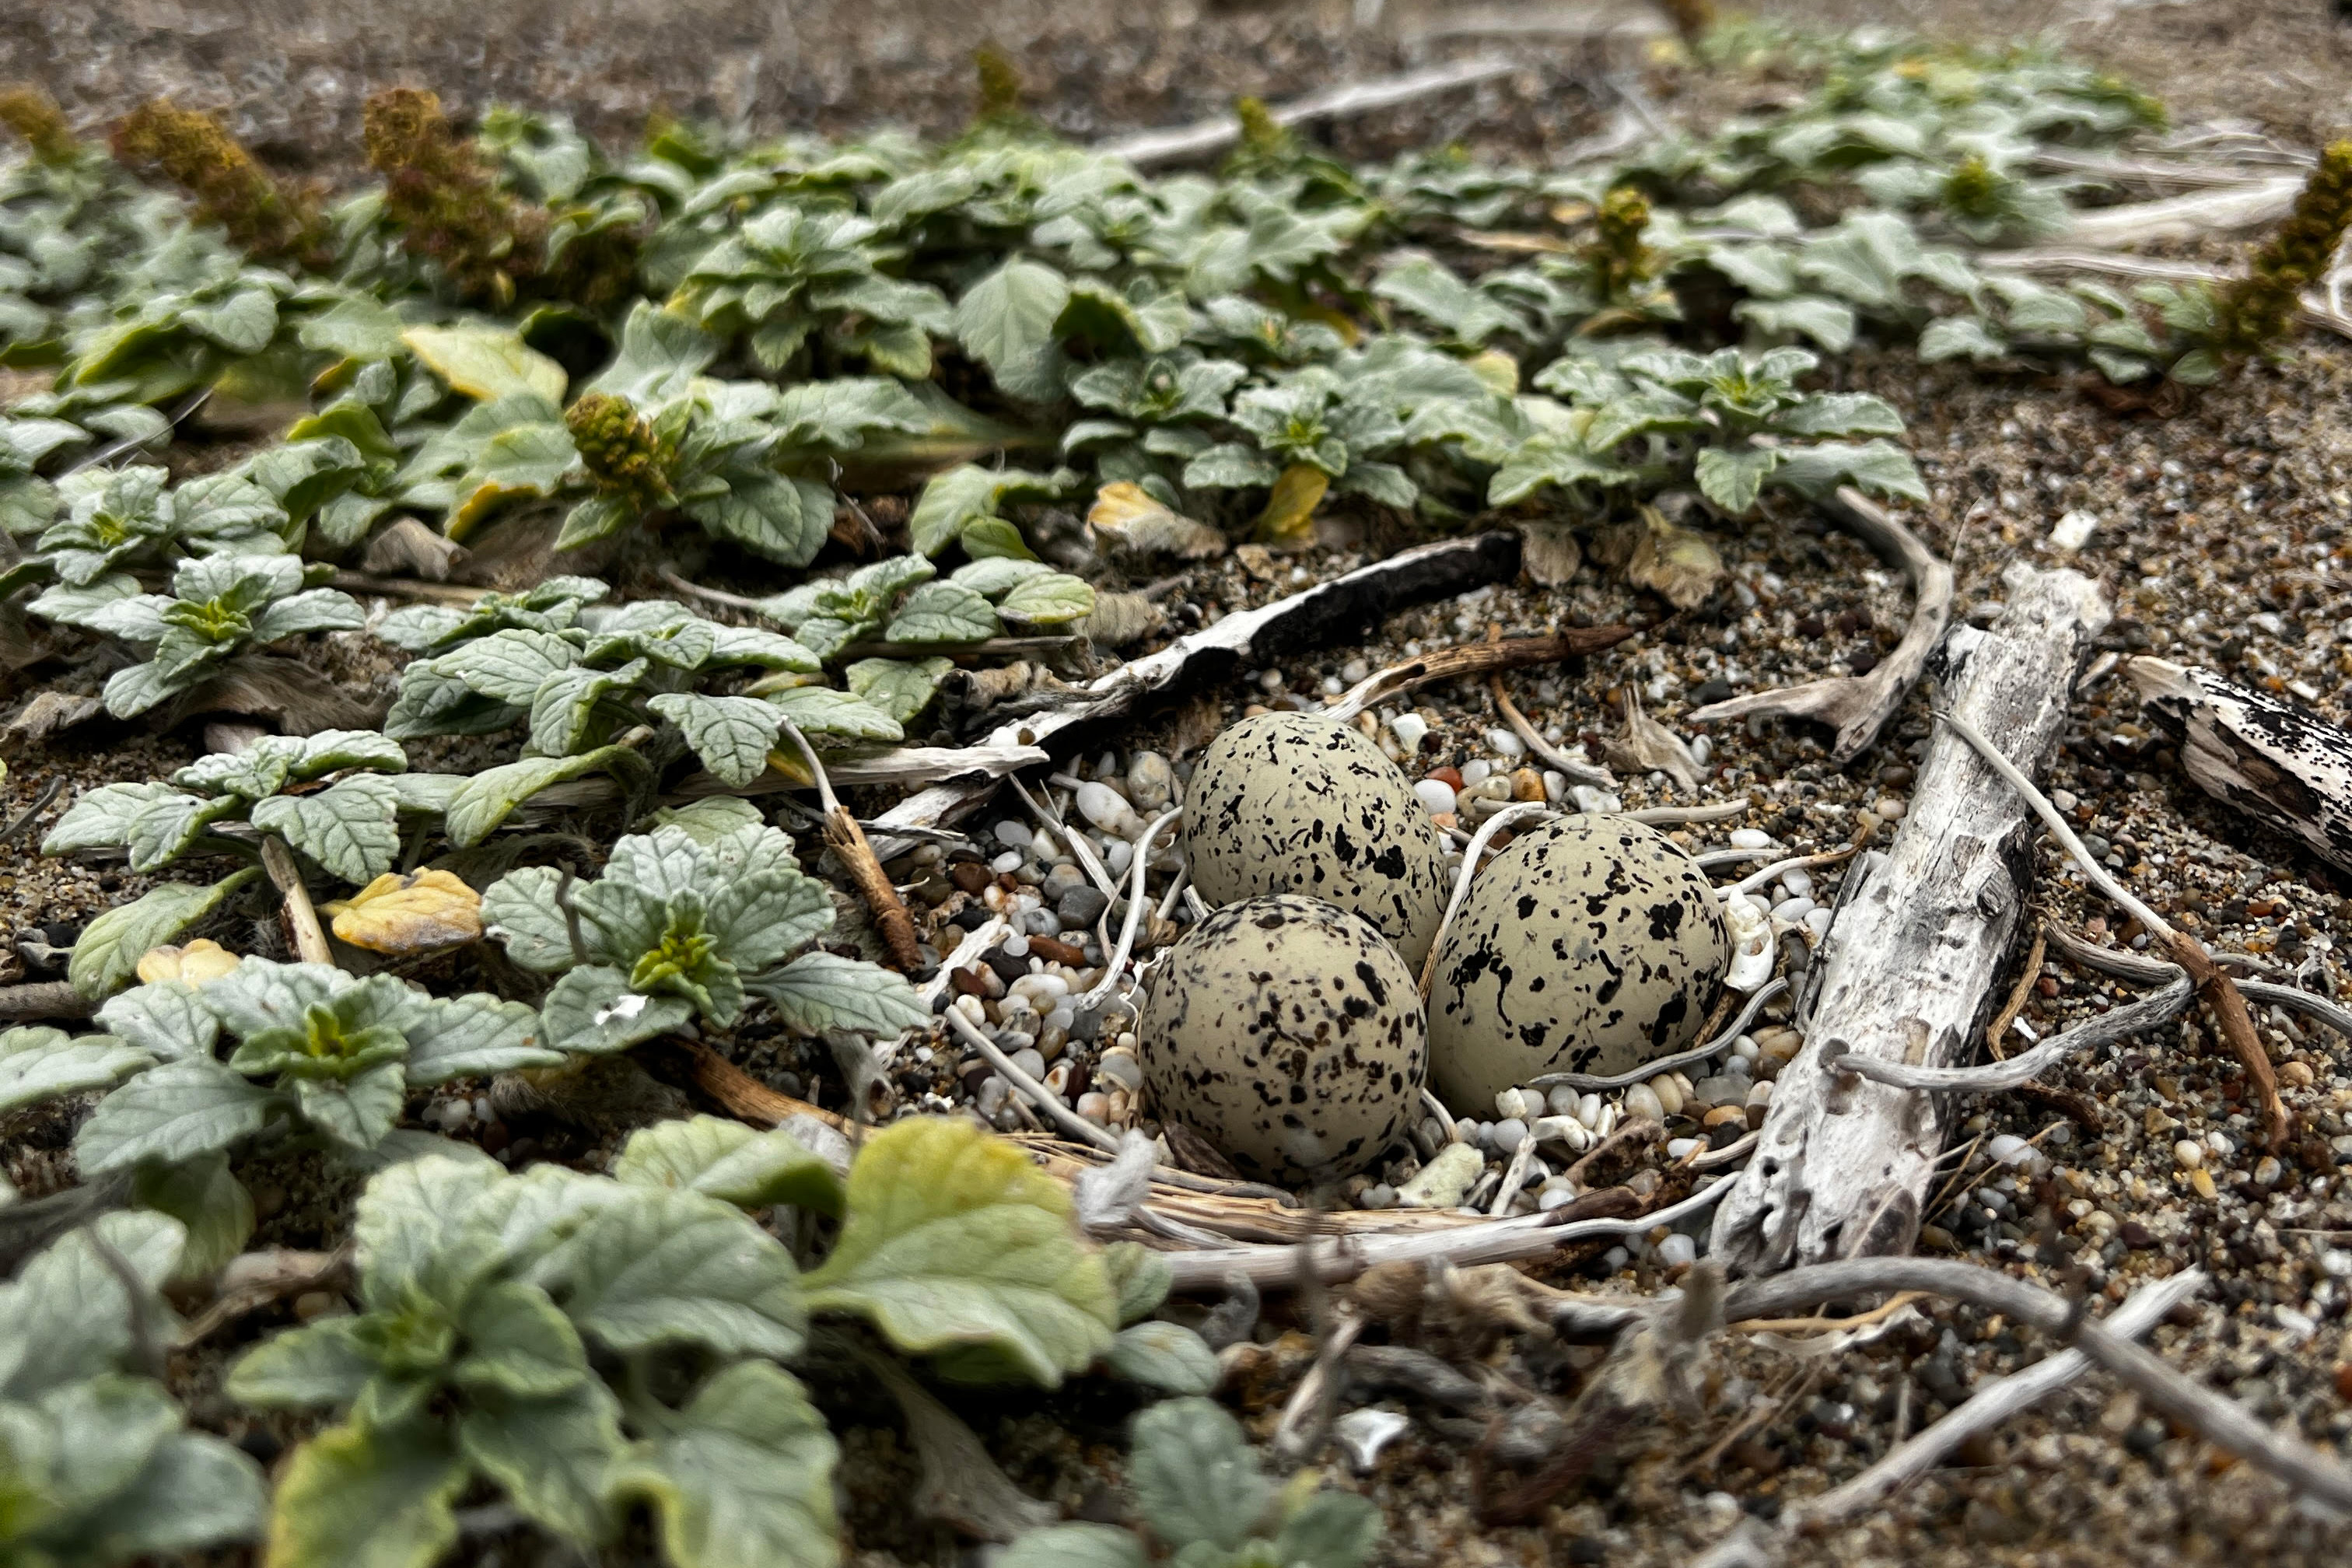 A photo of three small black-speckled, beige-colored eggs lying on sand surrounded by small green plants and small bits of wood.